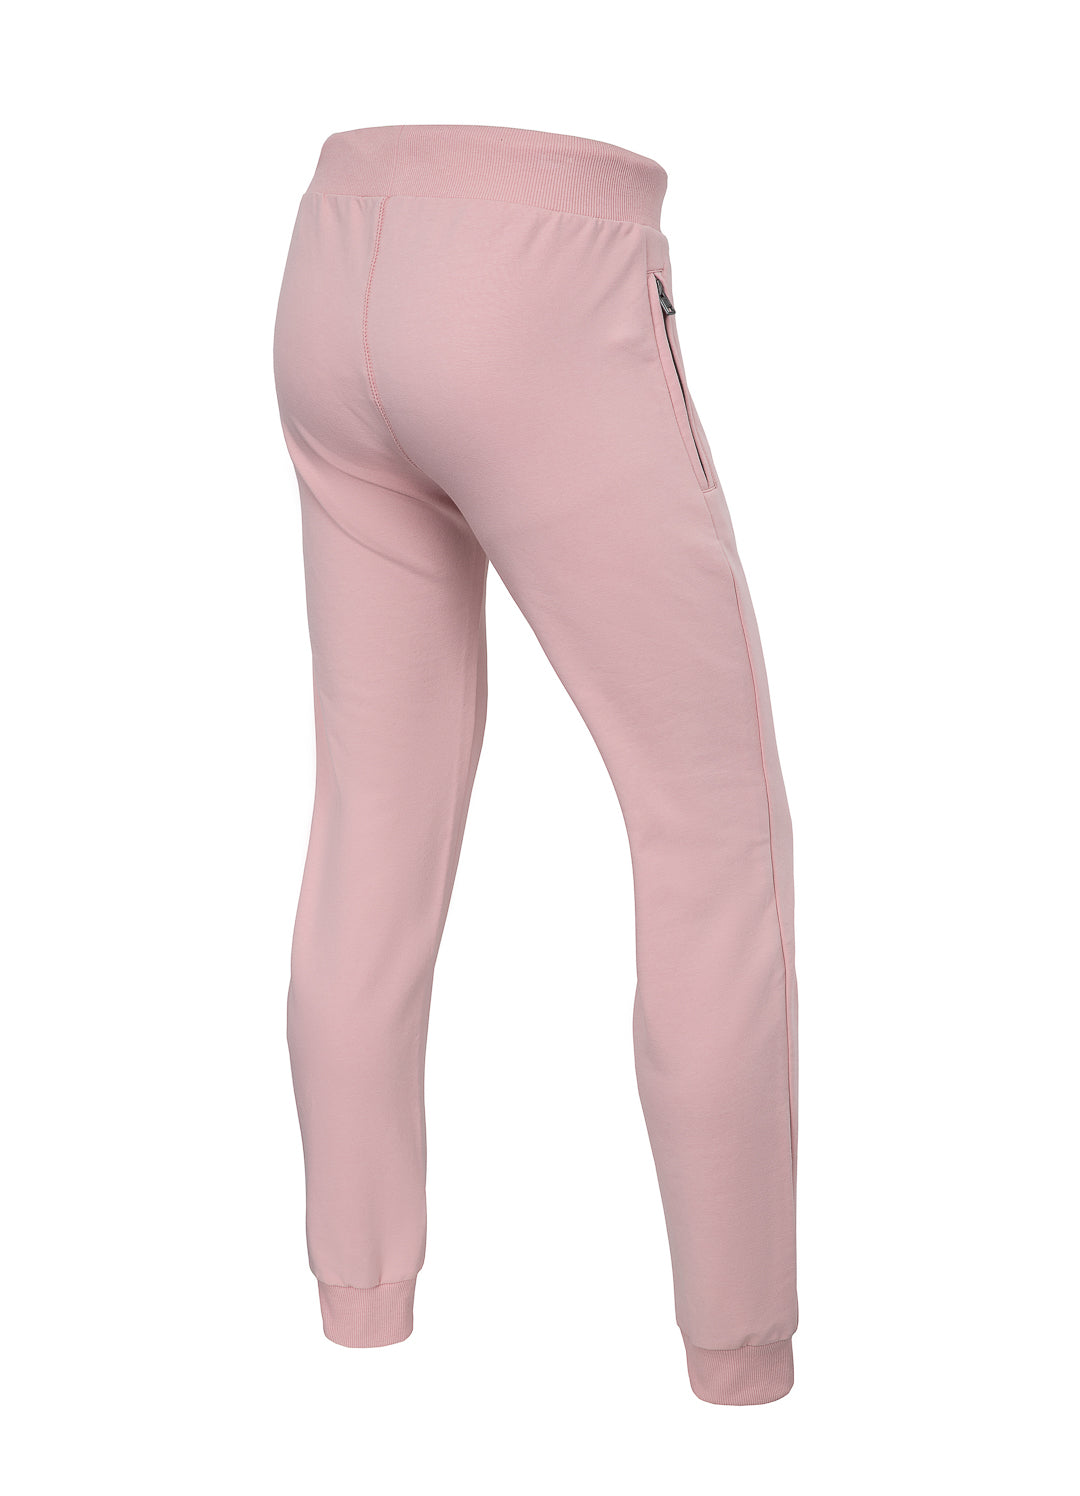 Women's Track Pants ELEANOR French Terry Pink - Pitbull West Coast International Store 